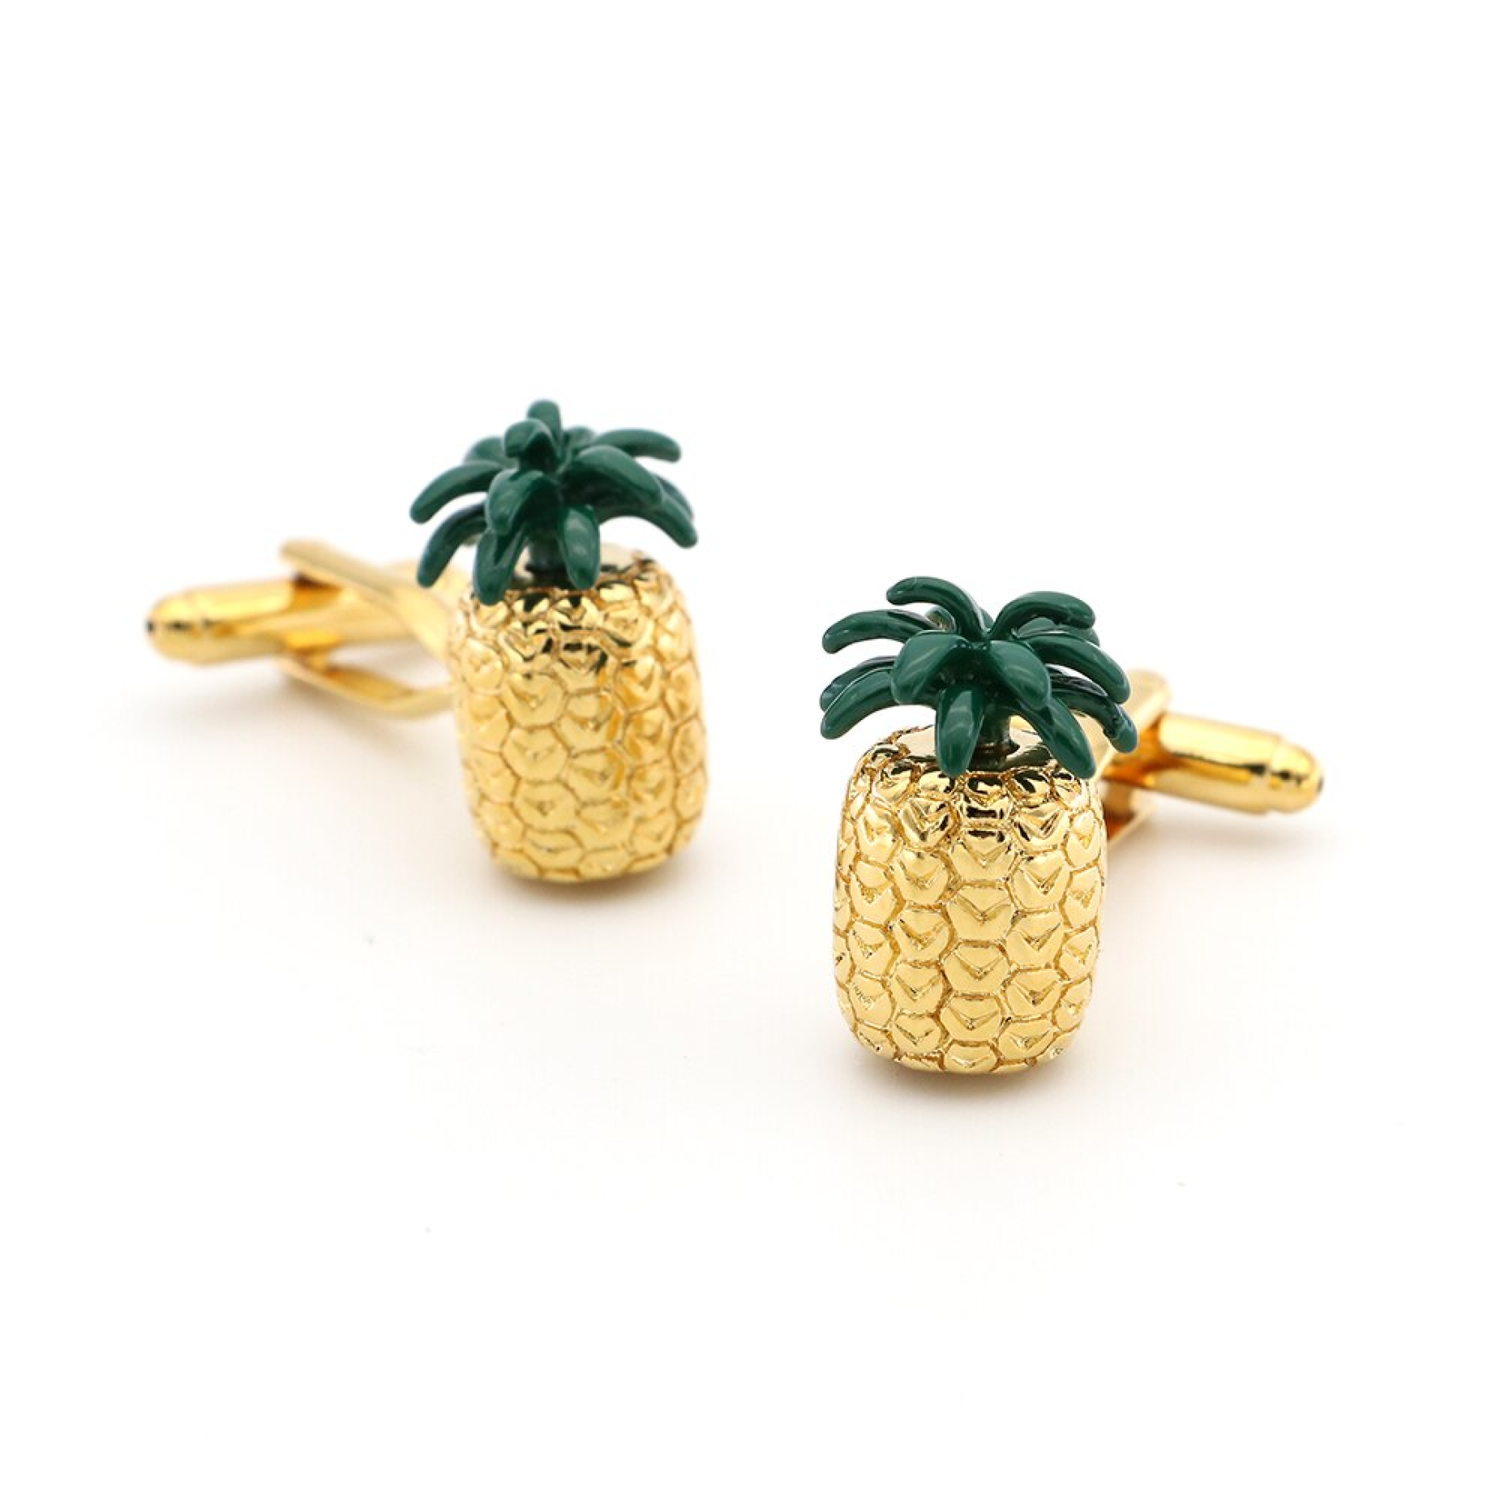 View 2: Gold and Green Colored Pineapple Cufflinks